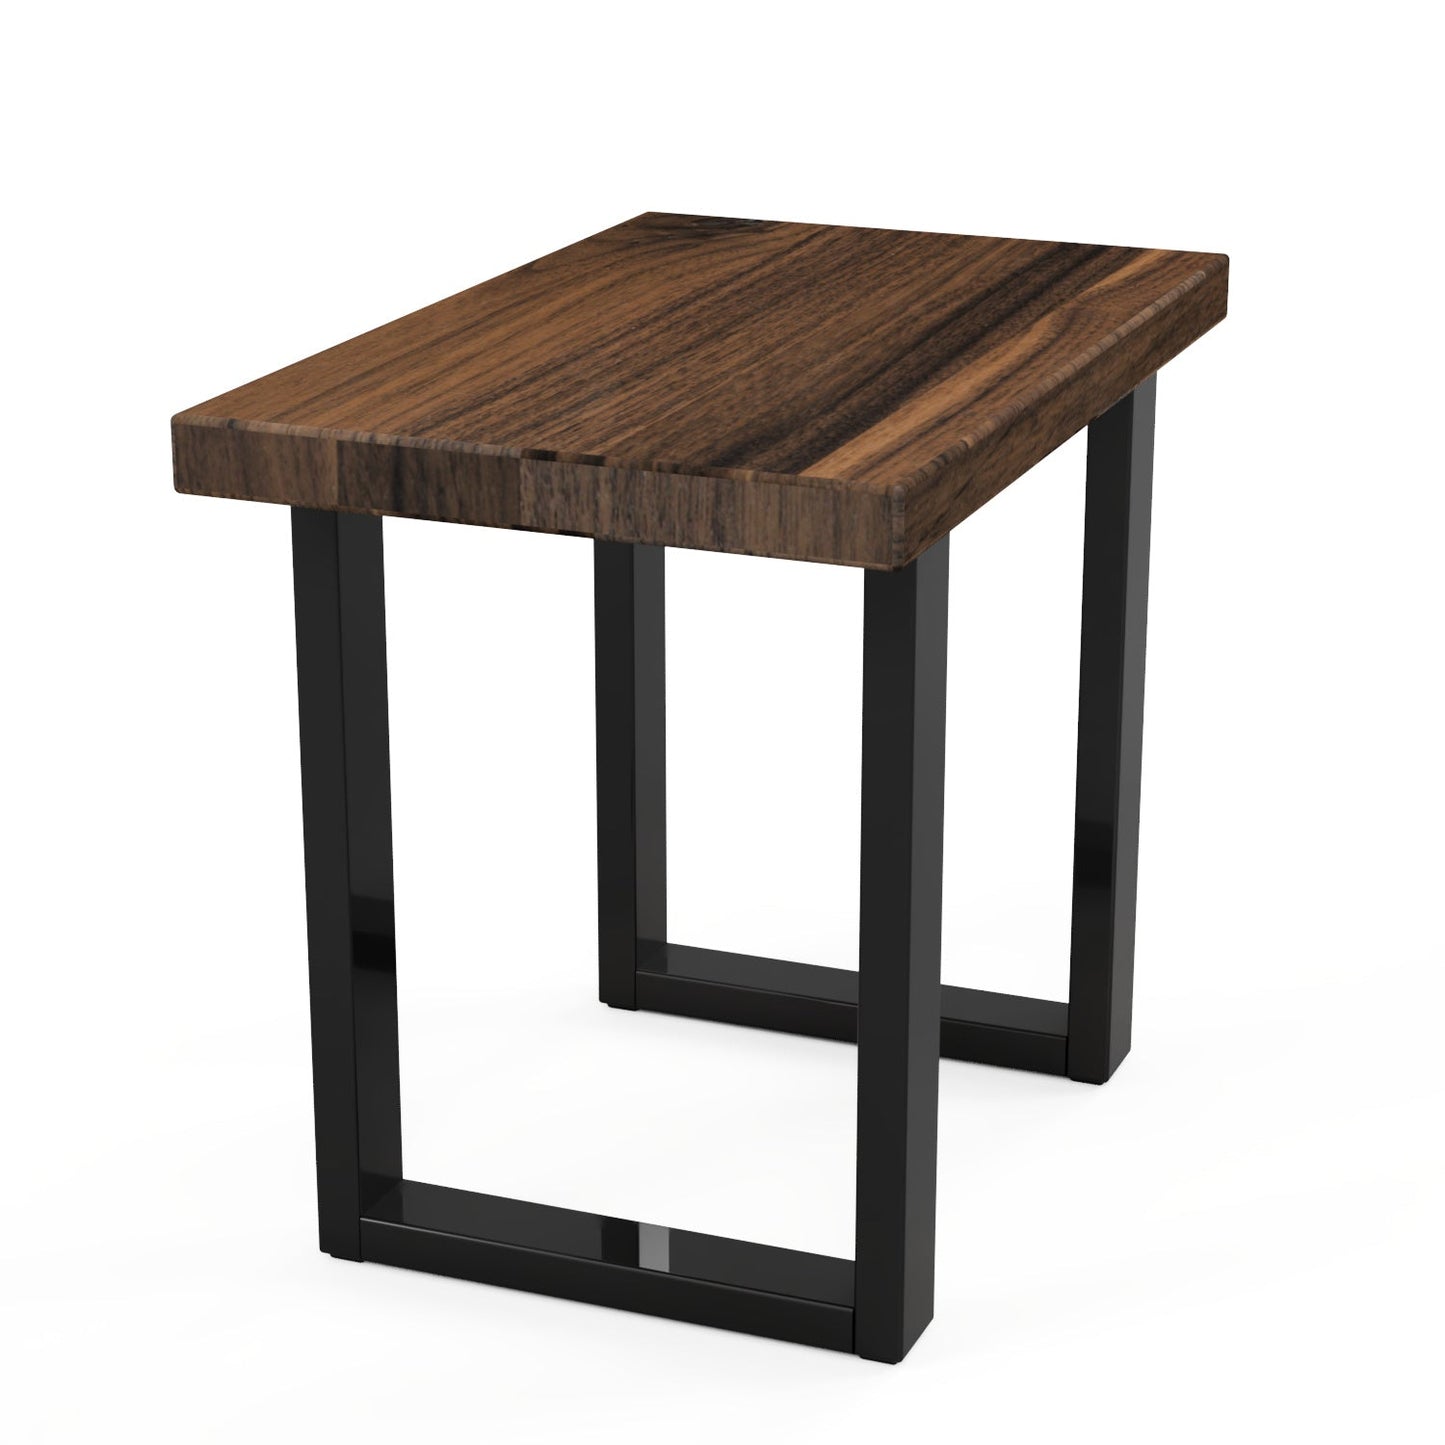 The Broadway End Table - FargoWoodworks